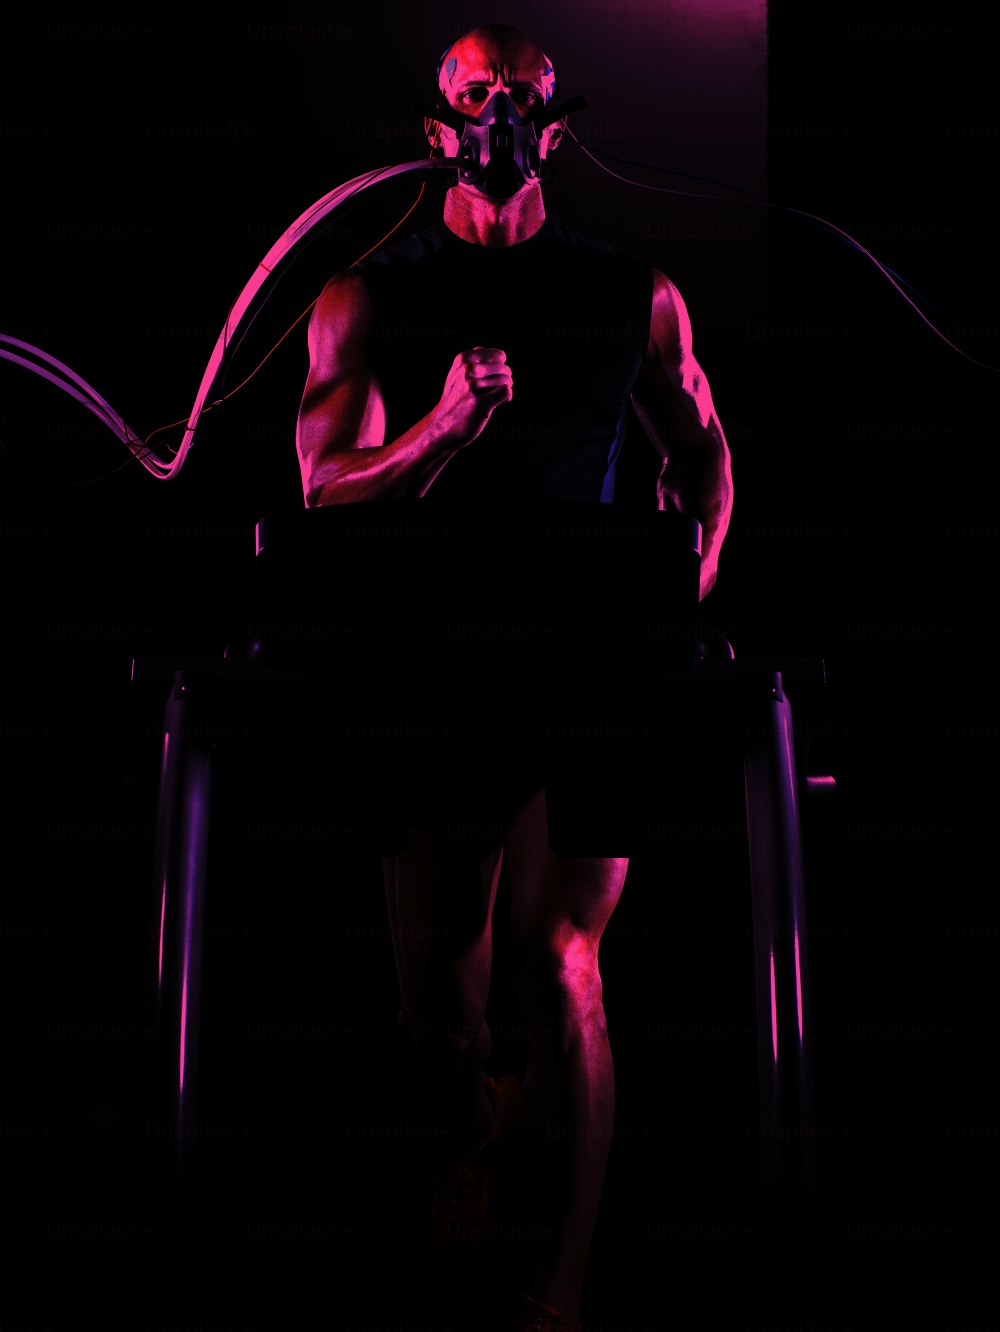 a man running on a treadmill with a mask on